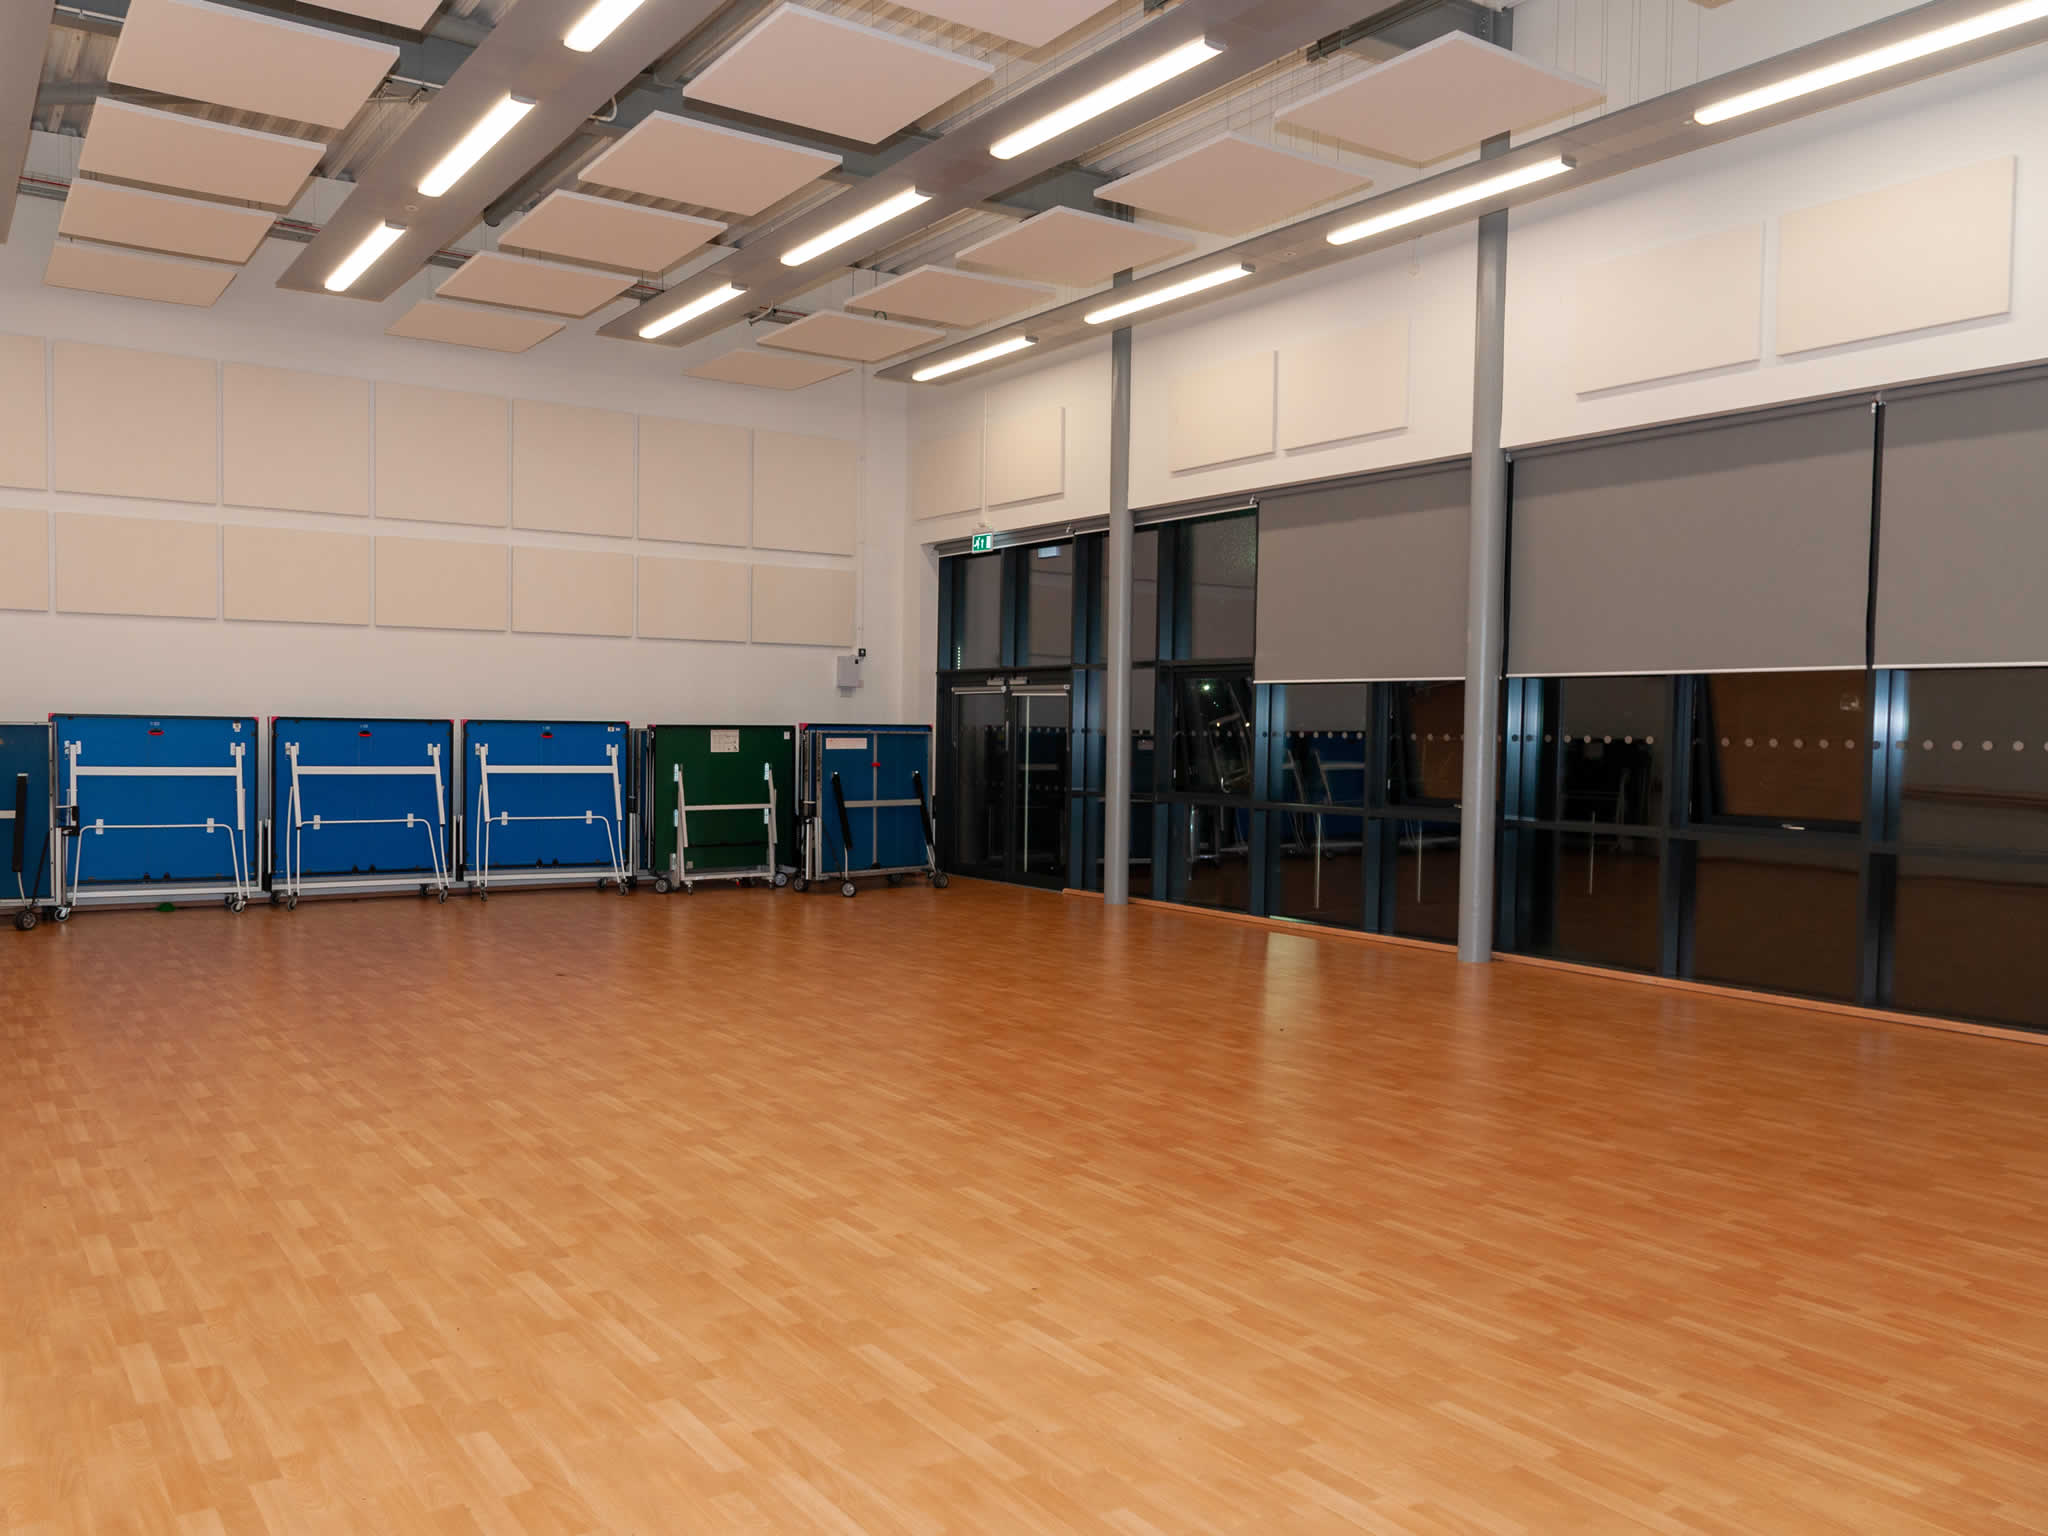 a dance studio which will be used as a workshop space